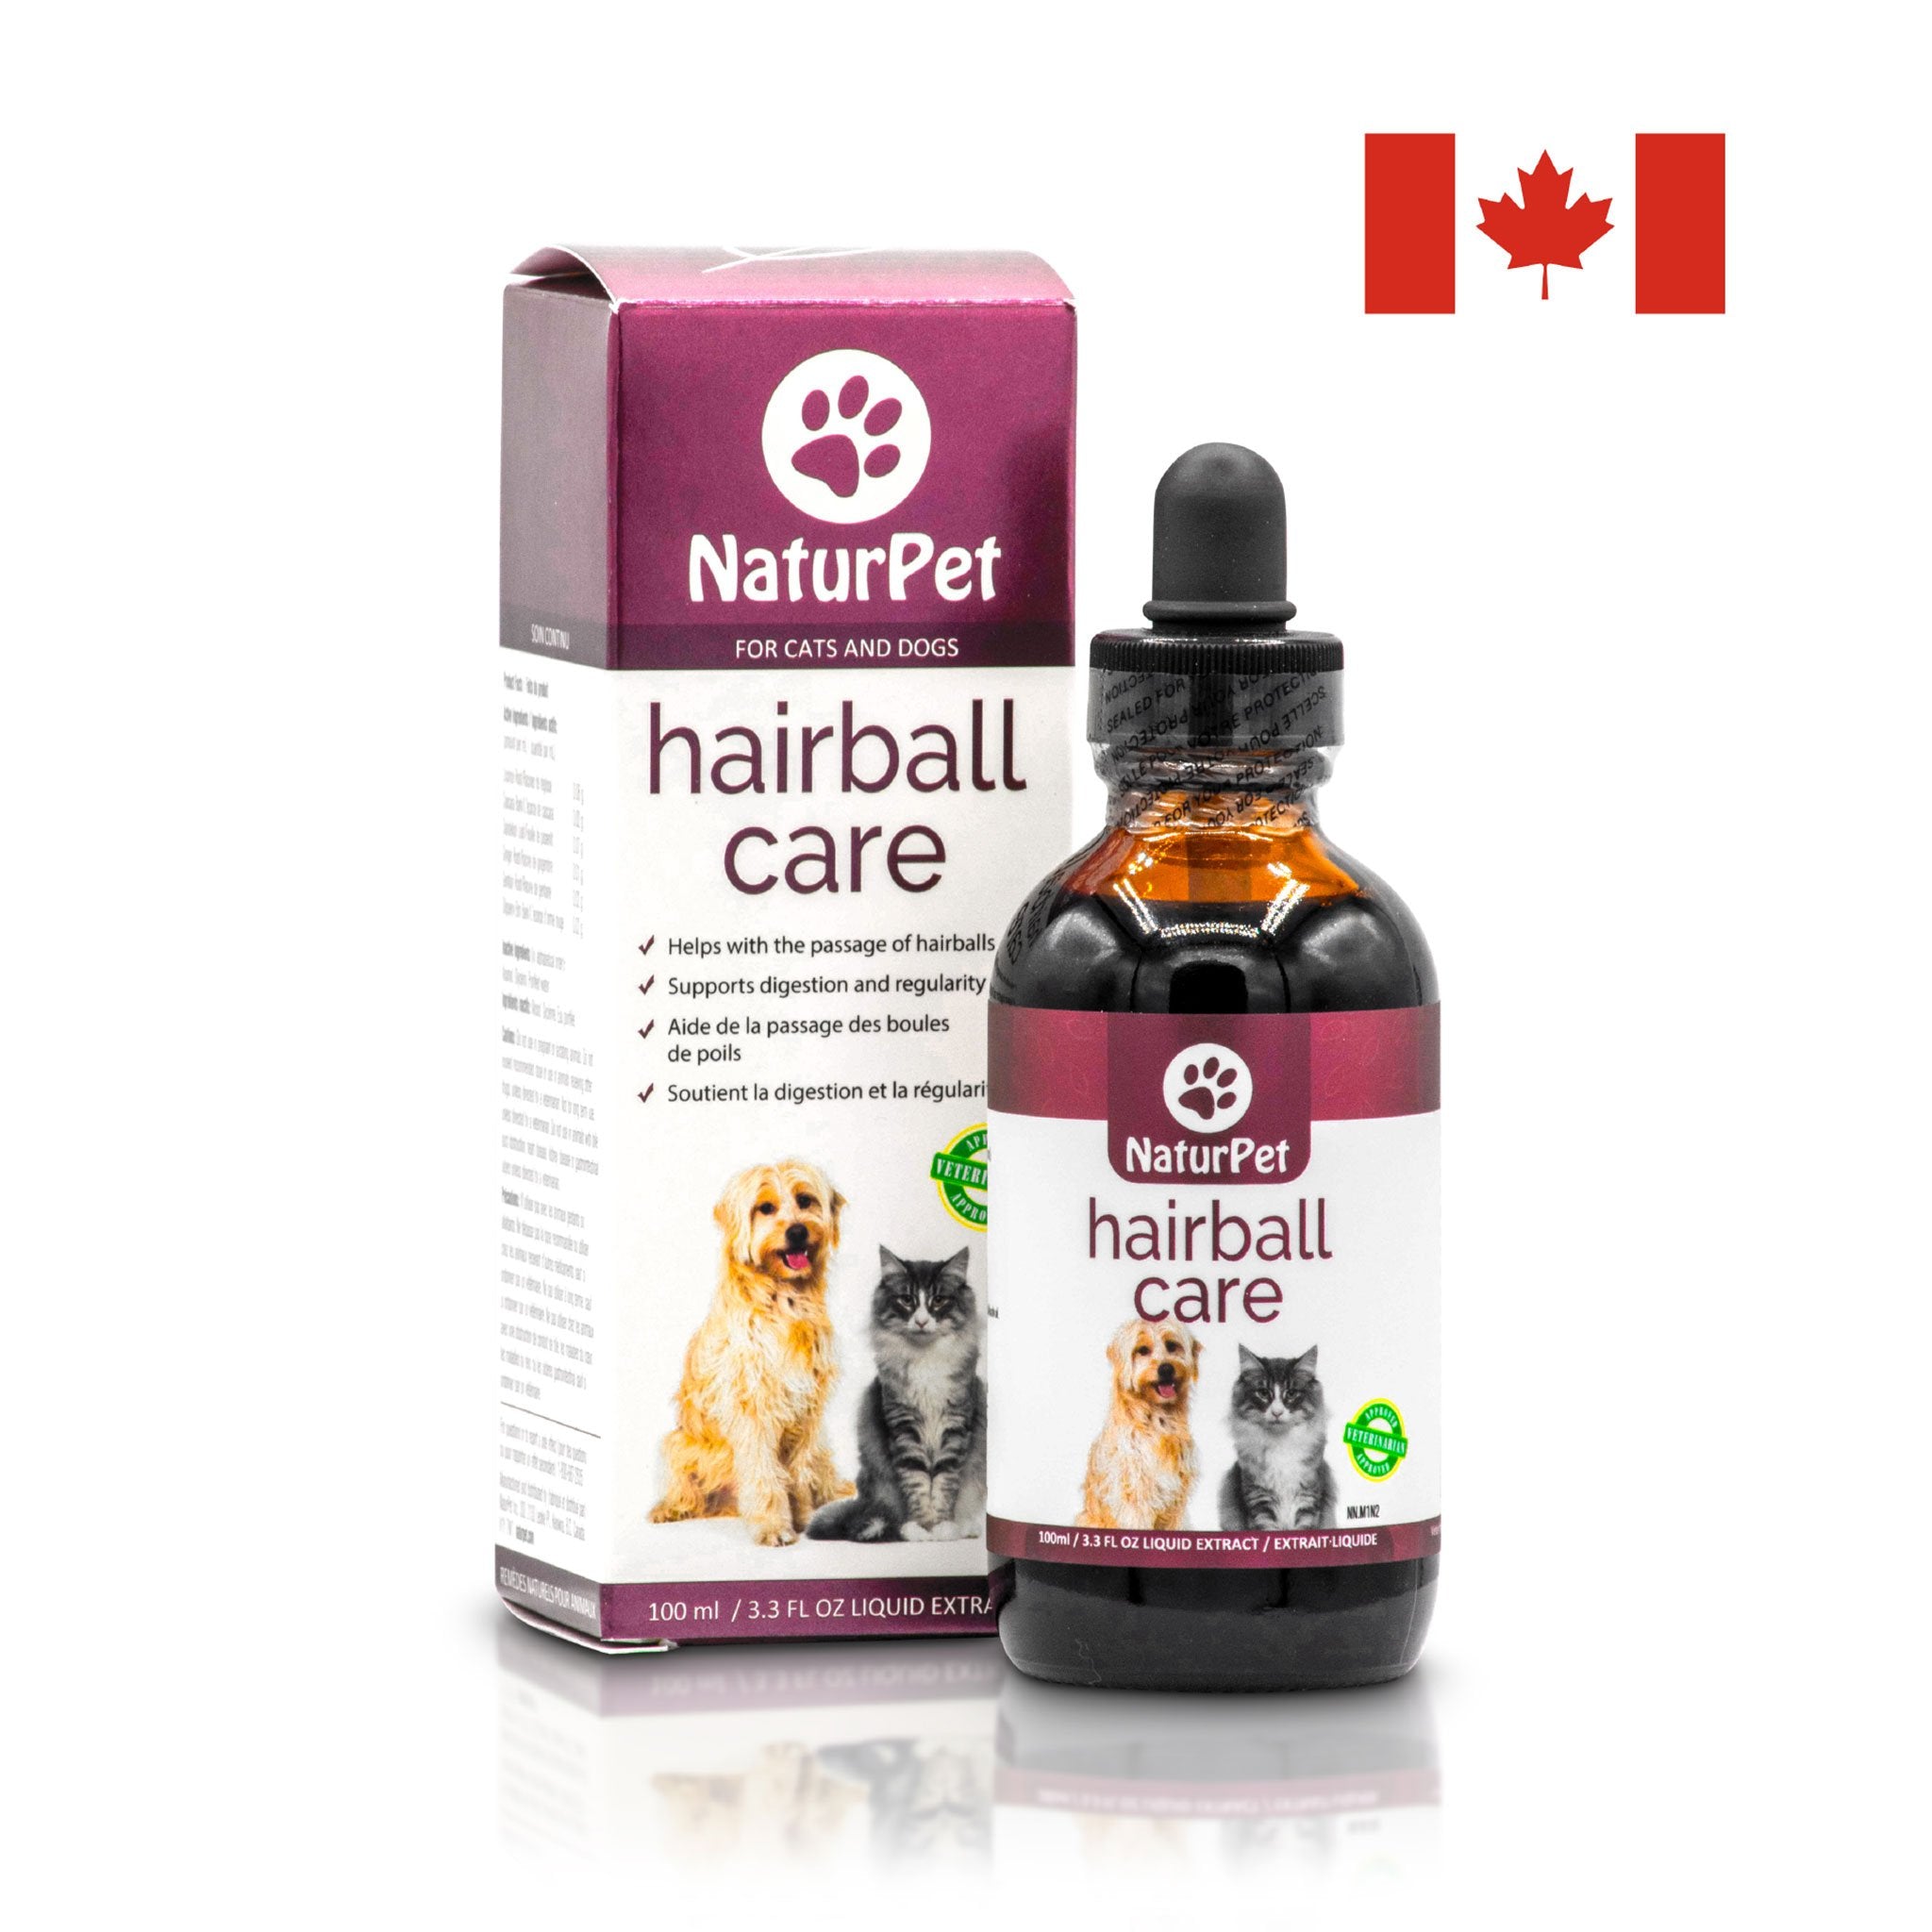 NaturPet Hairball Care Product